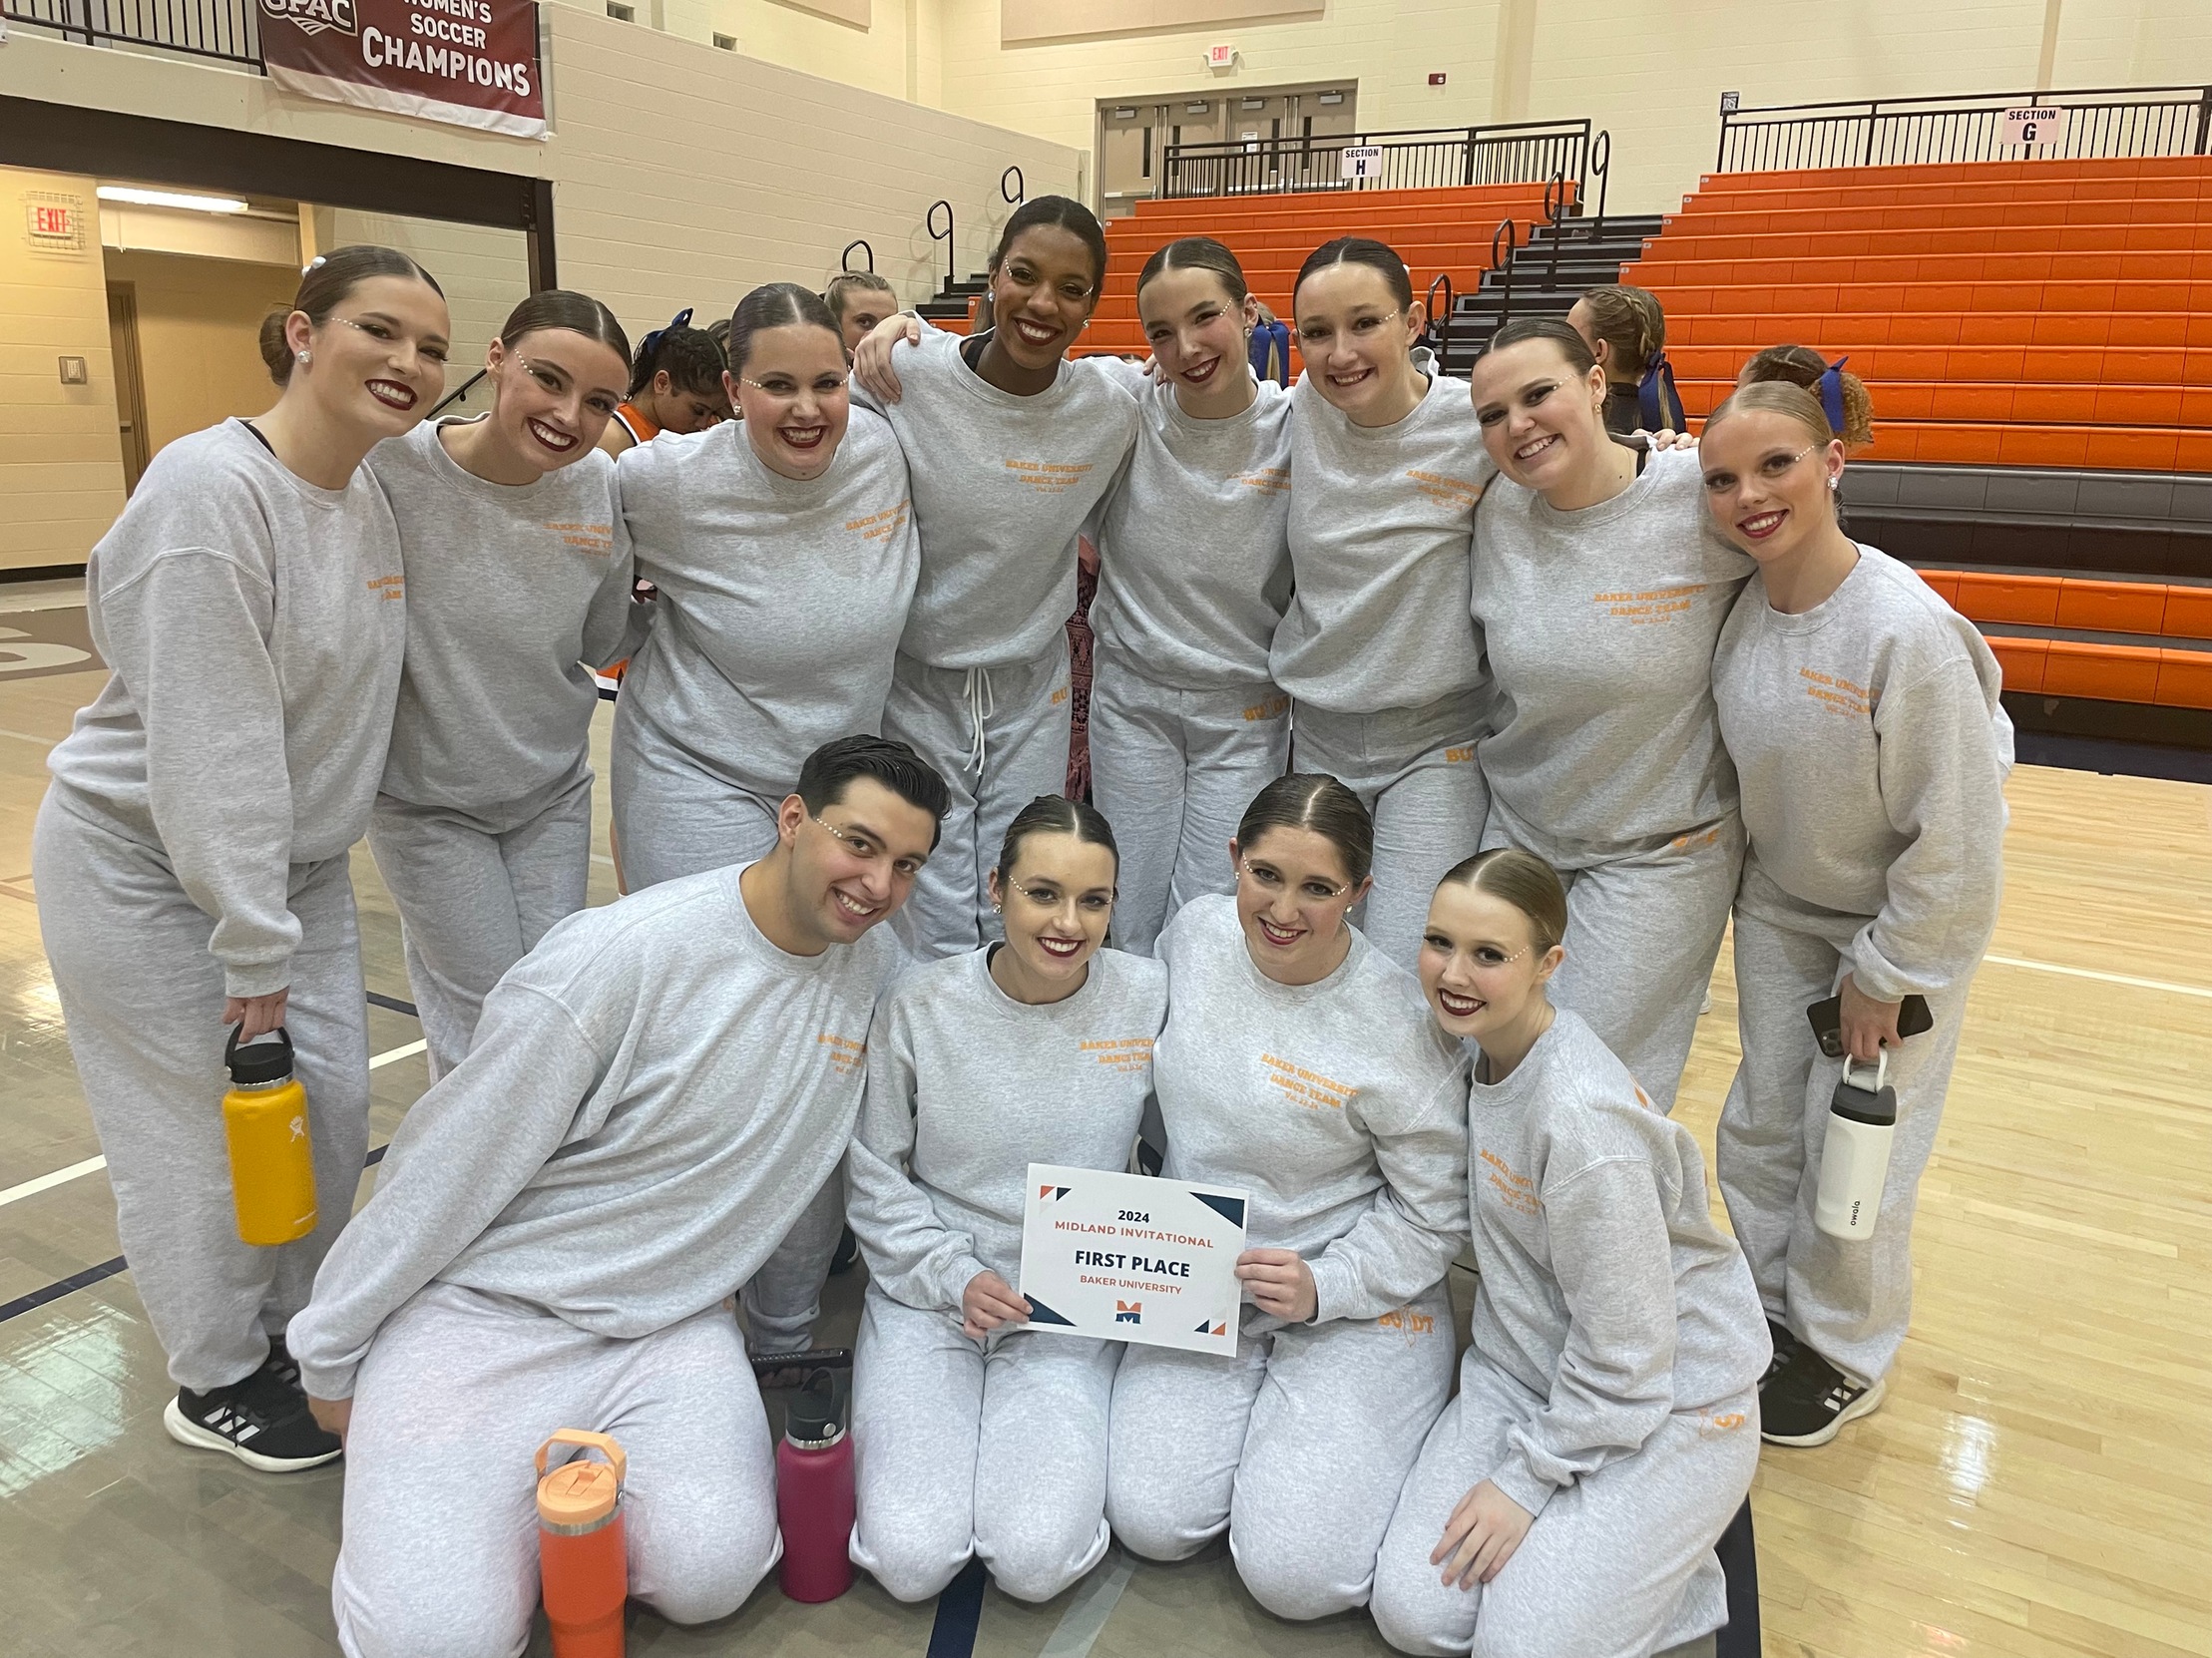 Dance Captures First-Place Title, Cheer Finishes Fourth at Midland Invitational